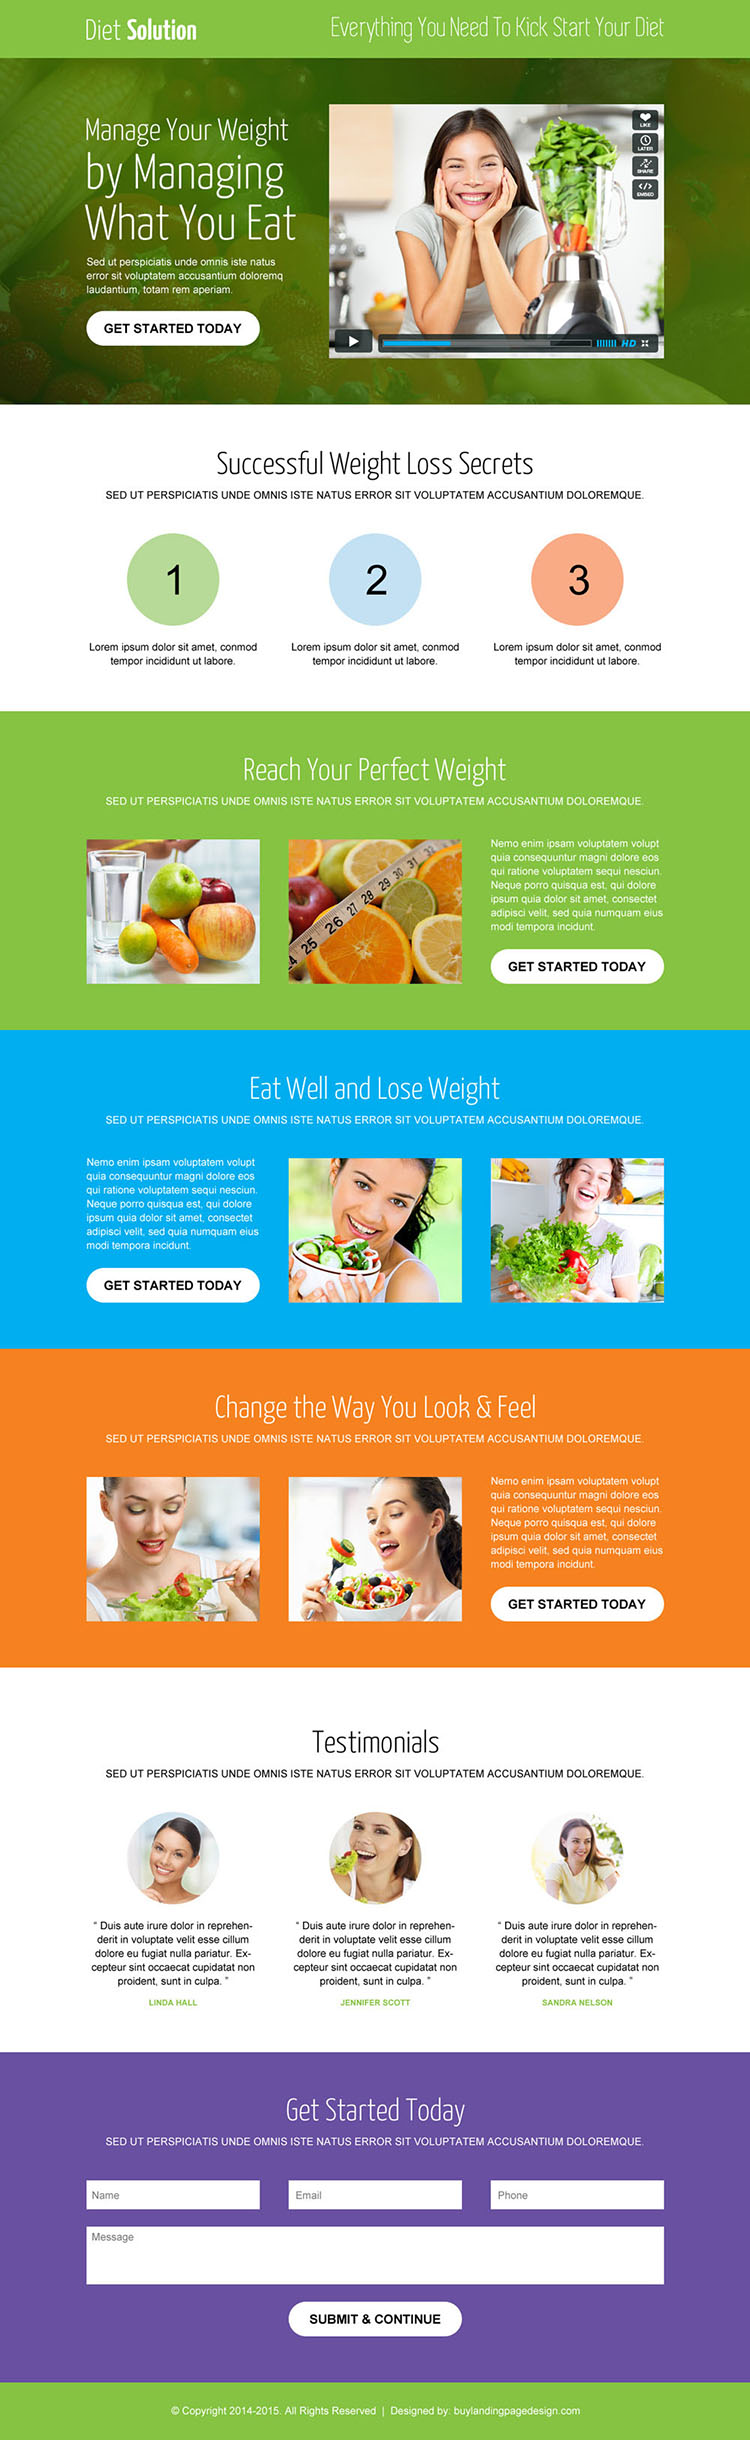 weight loss diet solution video call to action converting landing page